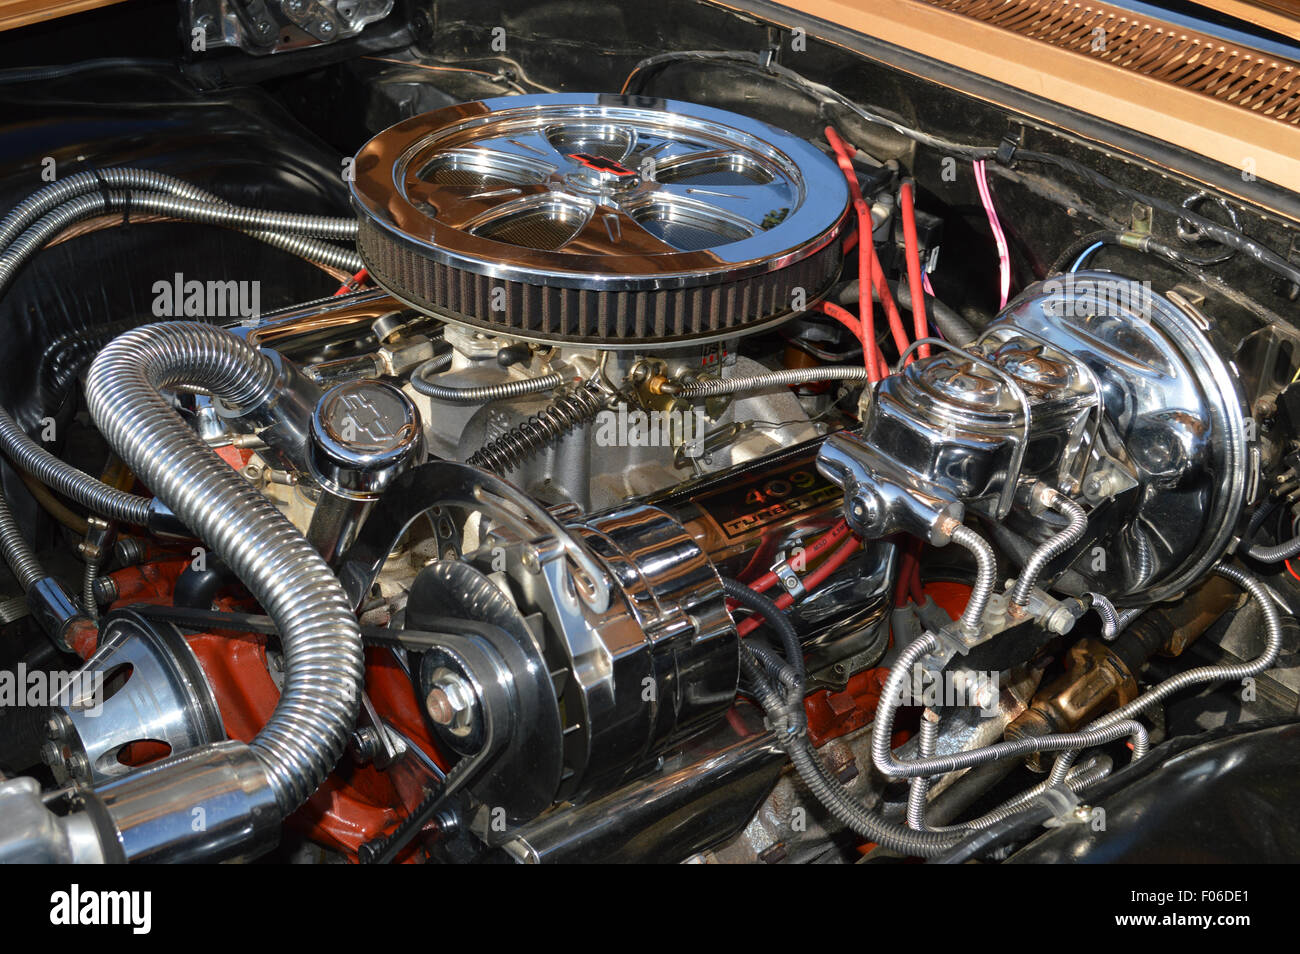 A 409cid Chevrolet Engine made famous by the Beach Boys song. Stock Photo